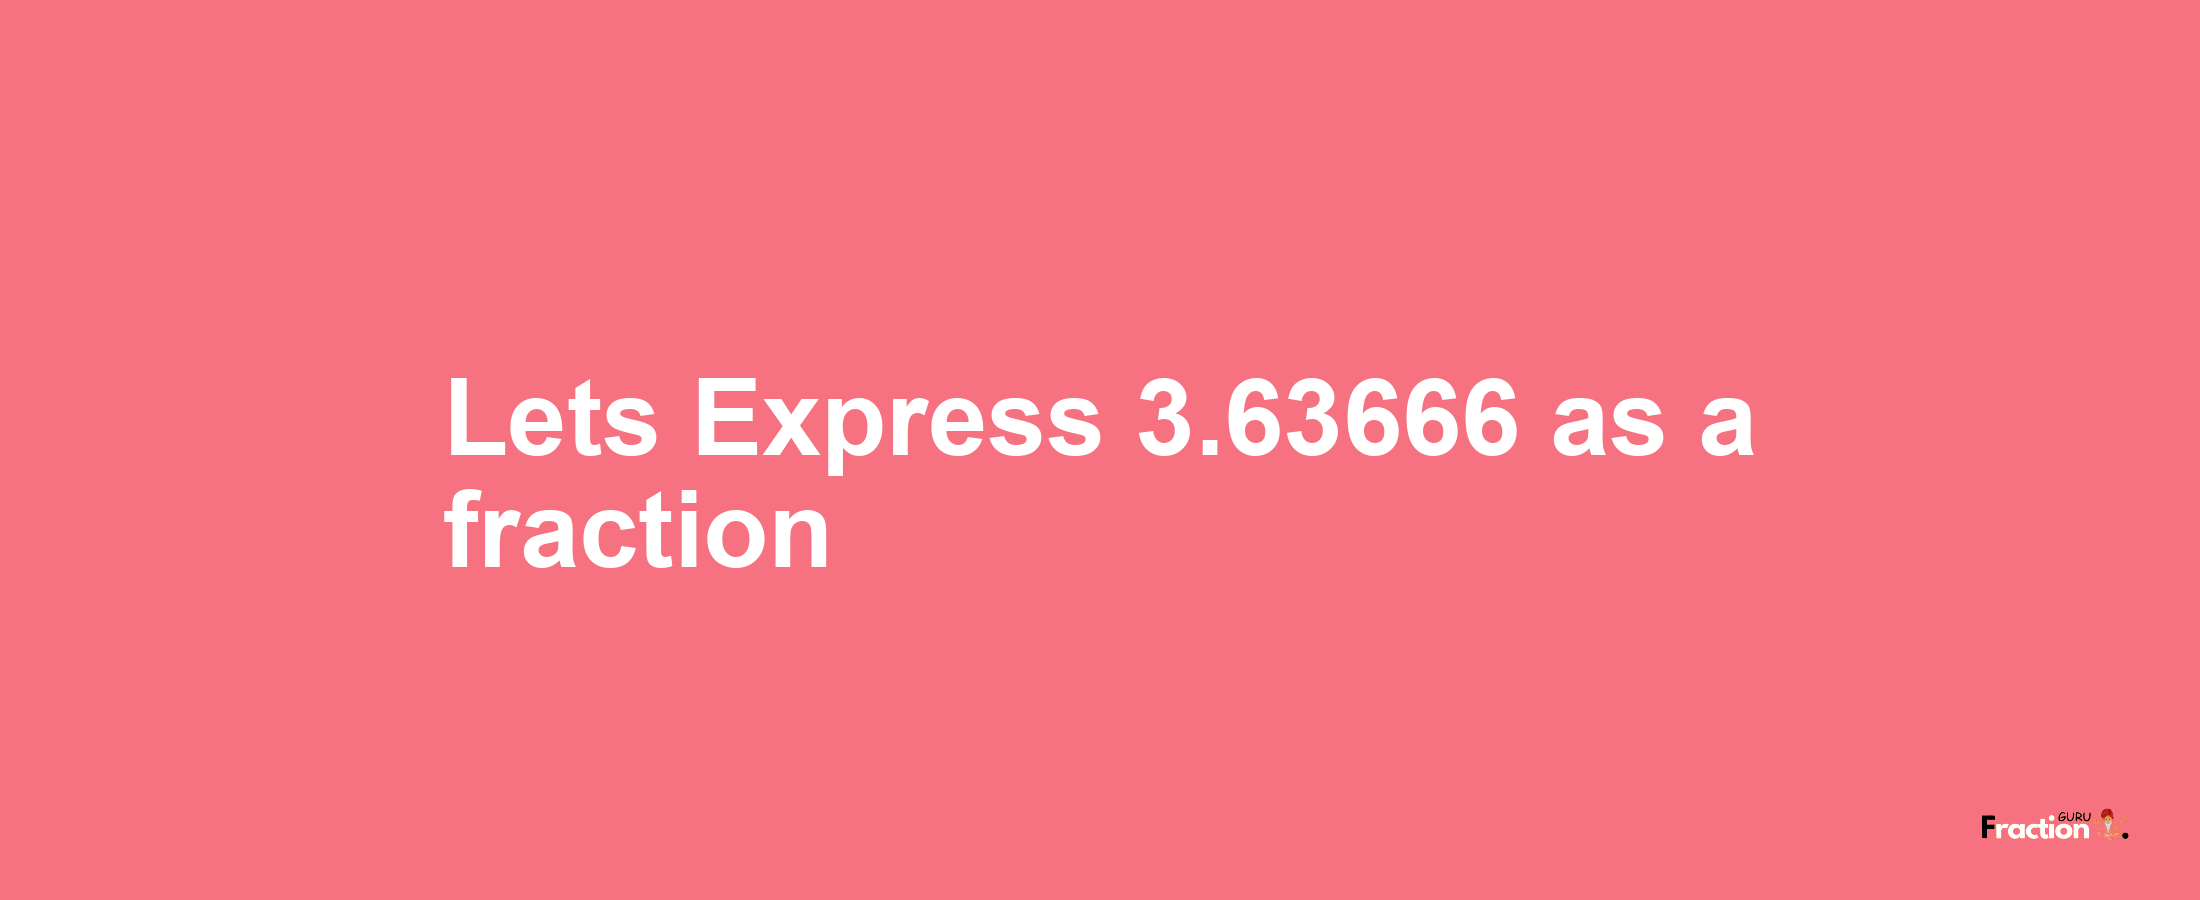 Lets Express 3.63666 as afraction